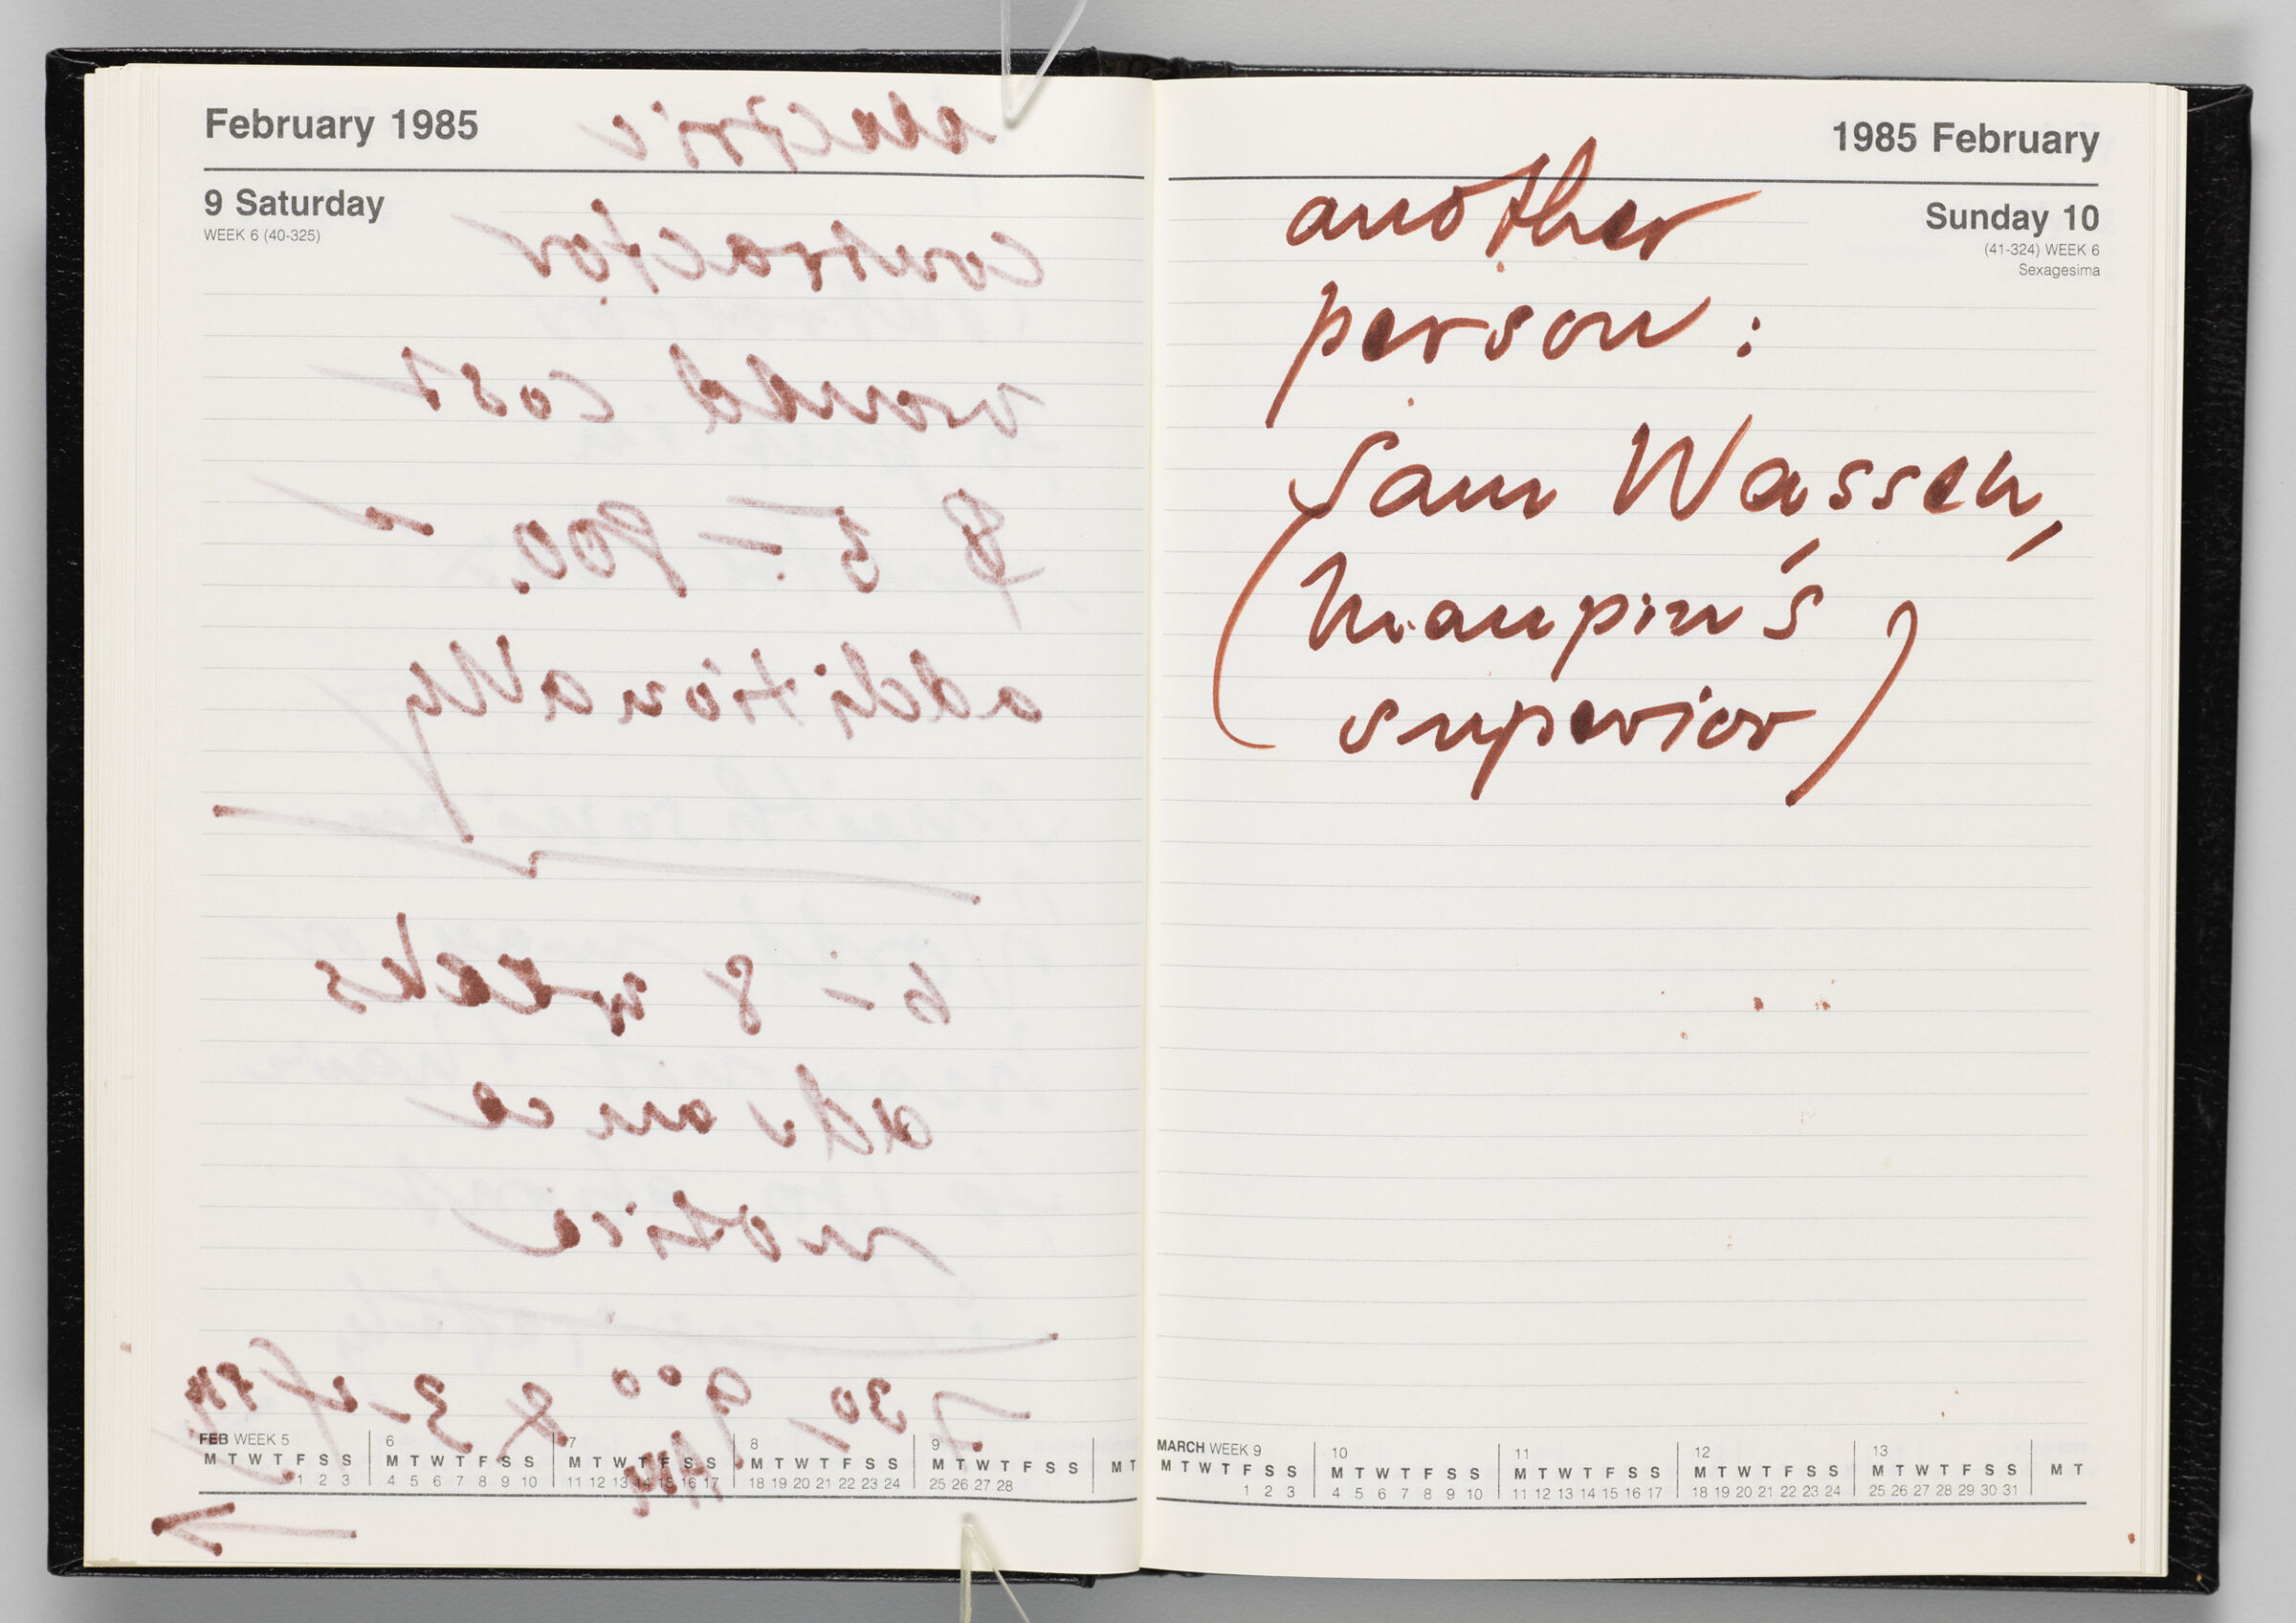 Untitled (Bleed-Through Of Previous Page, Left Page); Untitled (Notes On Calendar Page February 10, 1985, Right Page)